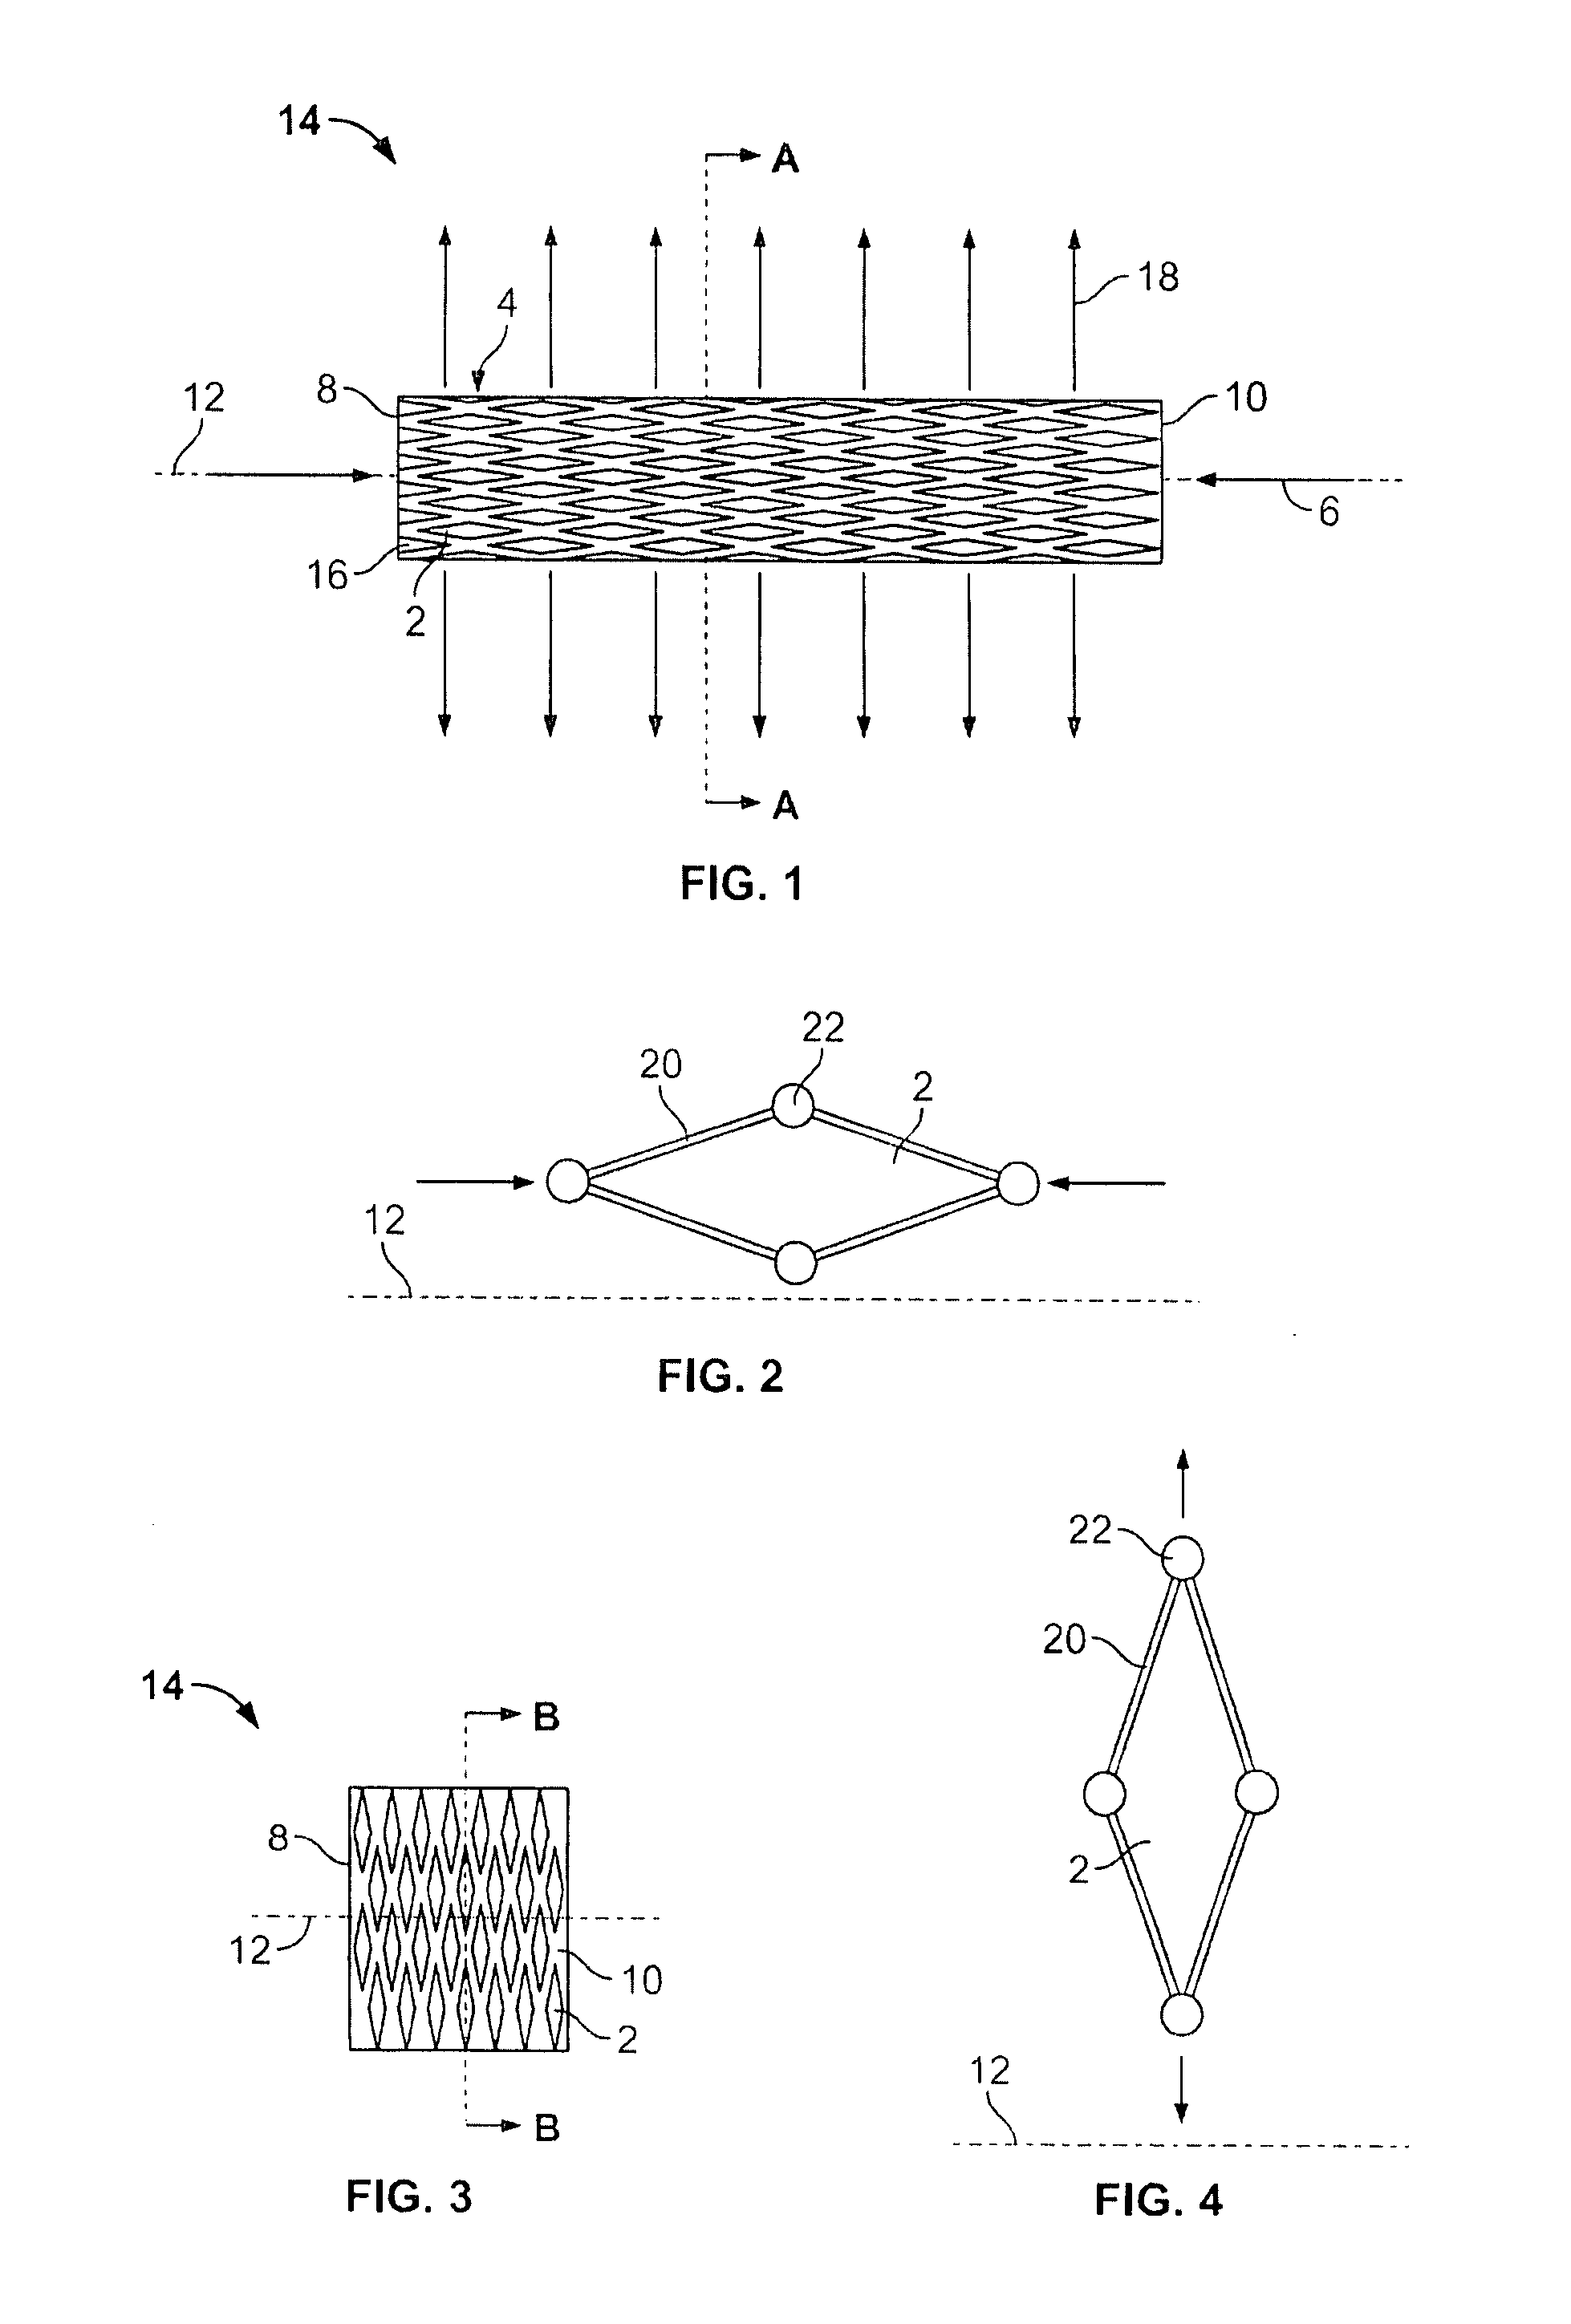 Expandable support device and methods of use